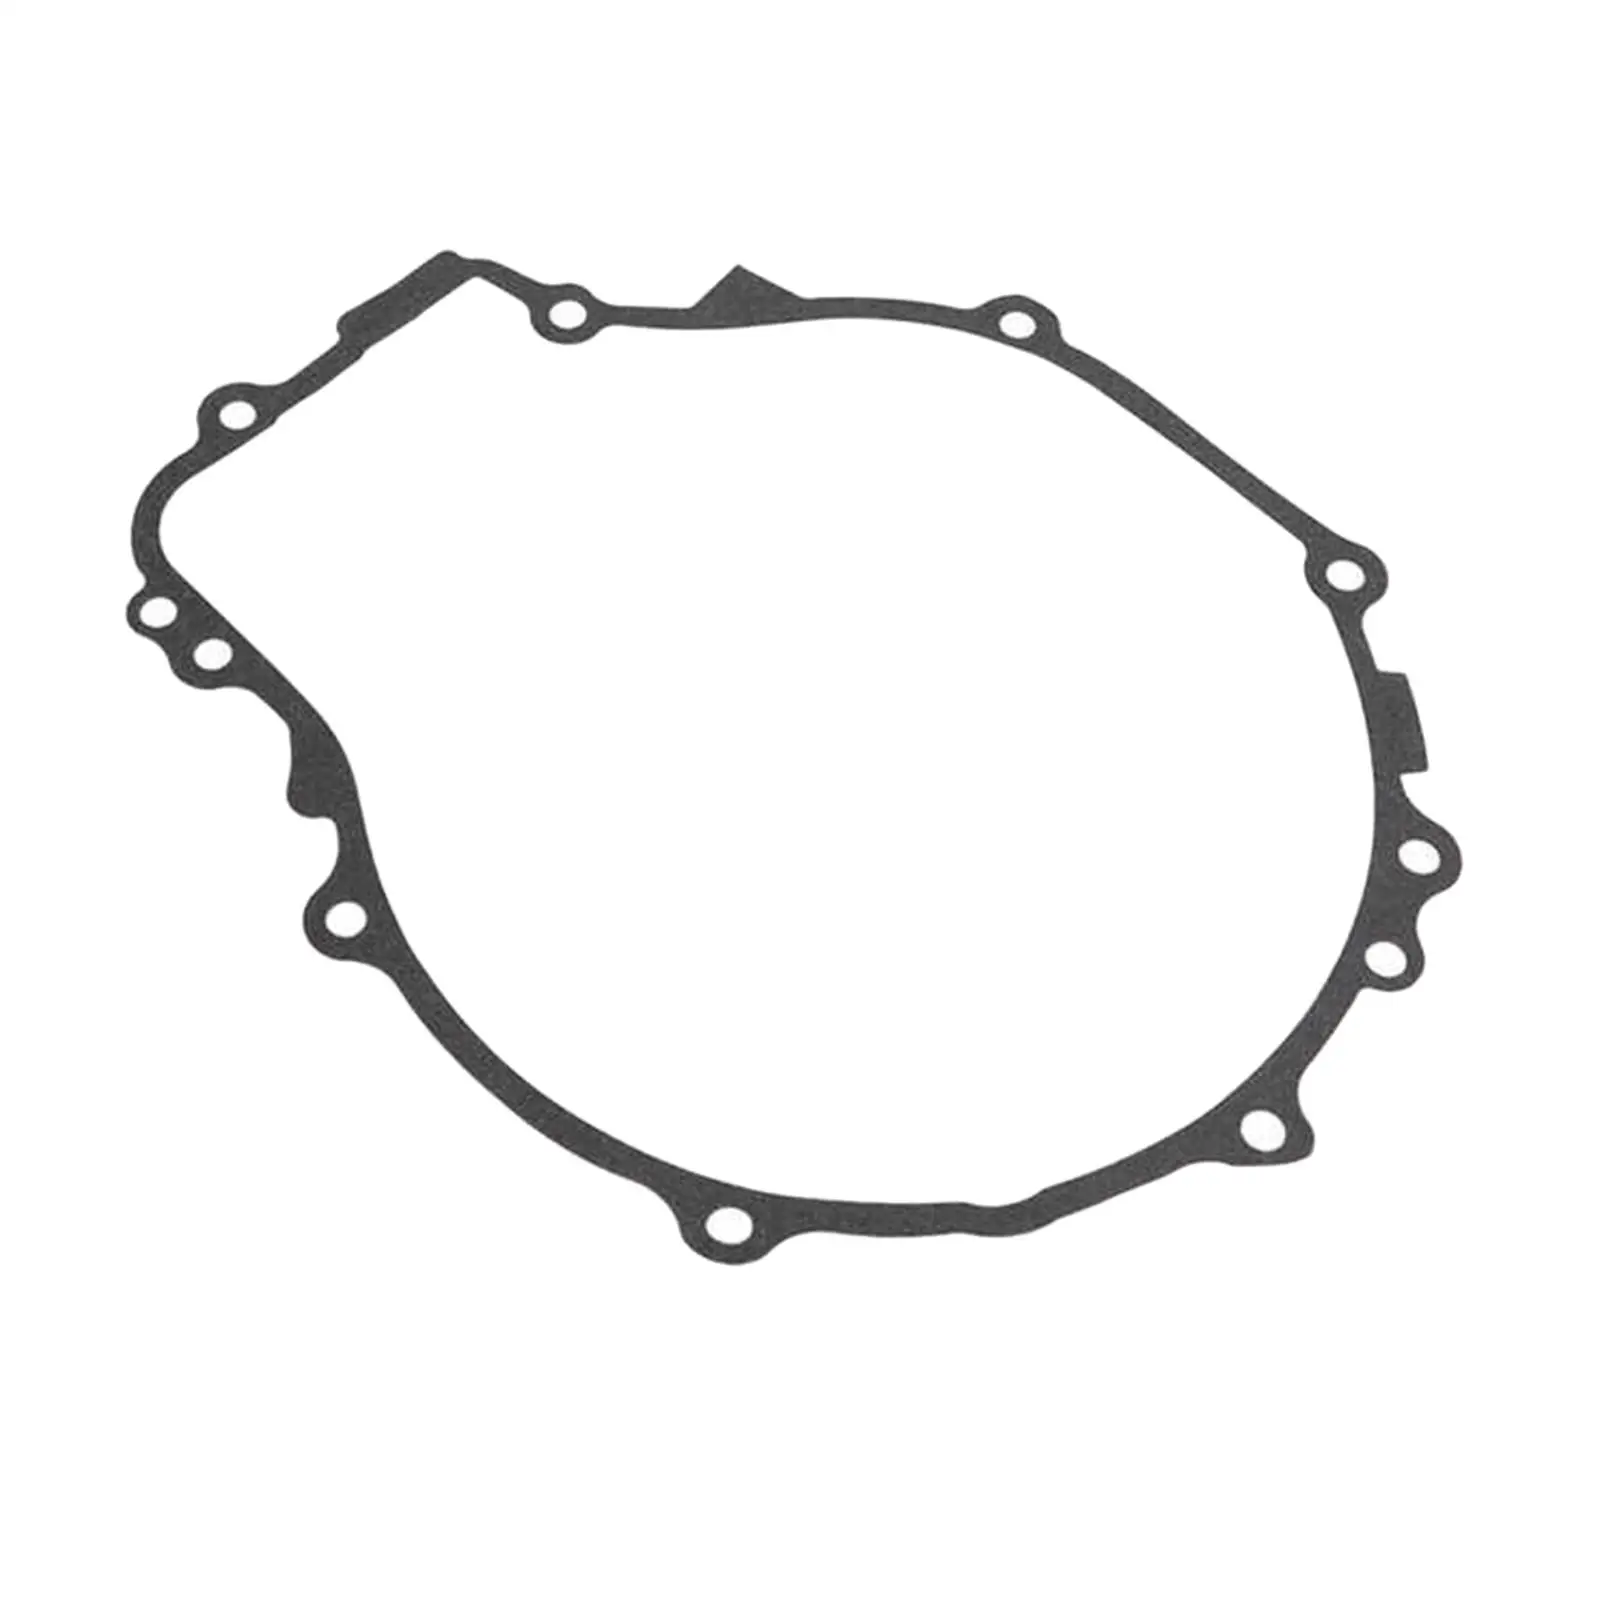 Vehicle Pull Start Gasket 3084933 for 500 Replace Parts High Quality